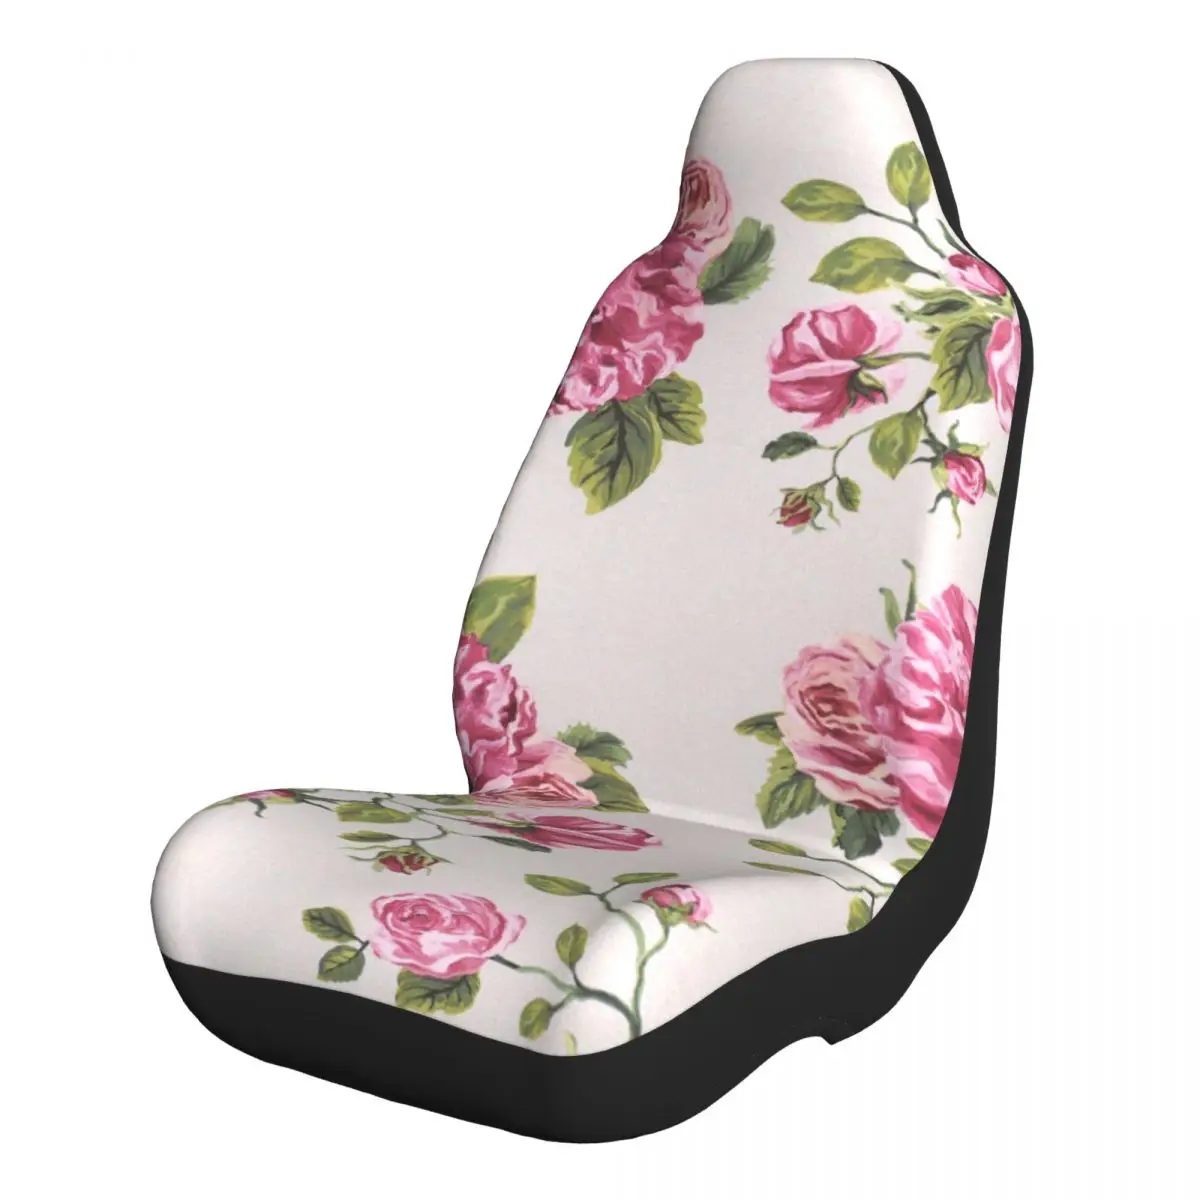 

Pink Rose Universal Car Seat Covers Front Seats Protectors Cover for Truck Van SUV Seat Protecto Accessories